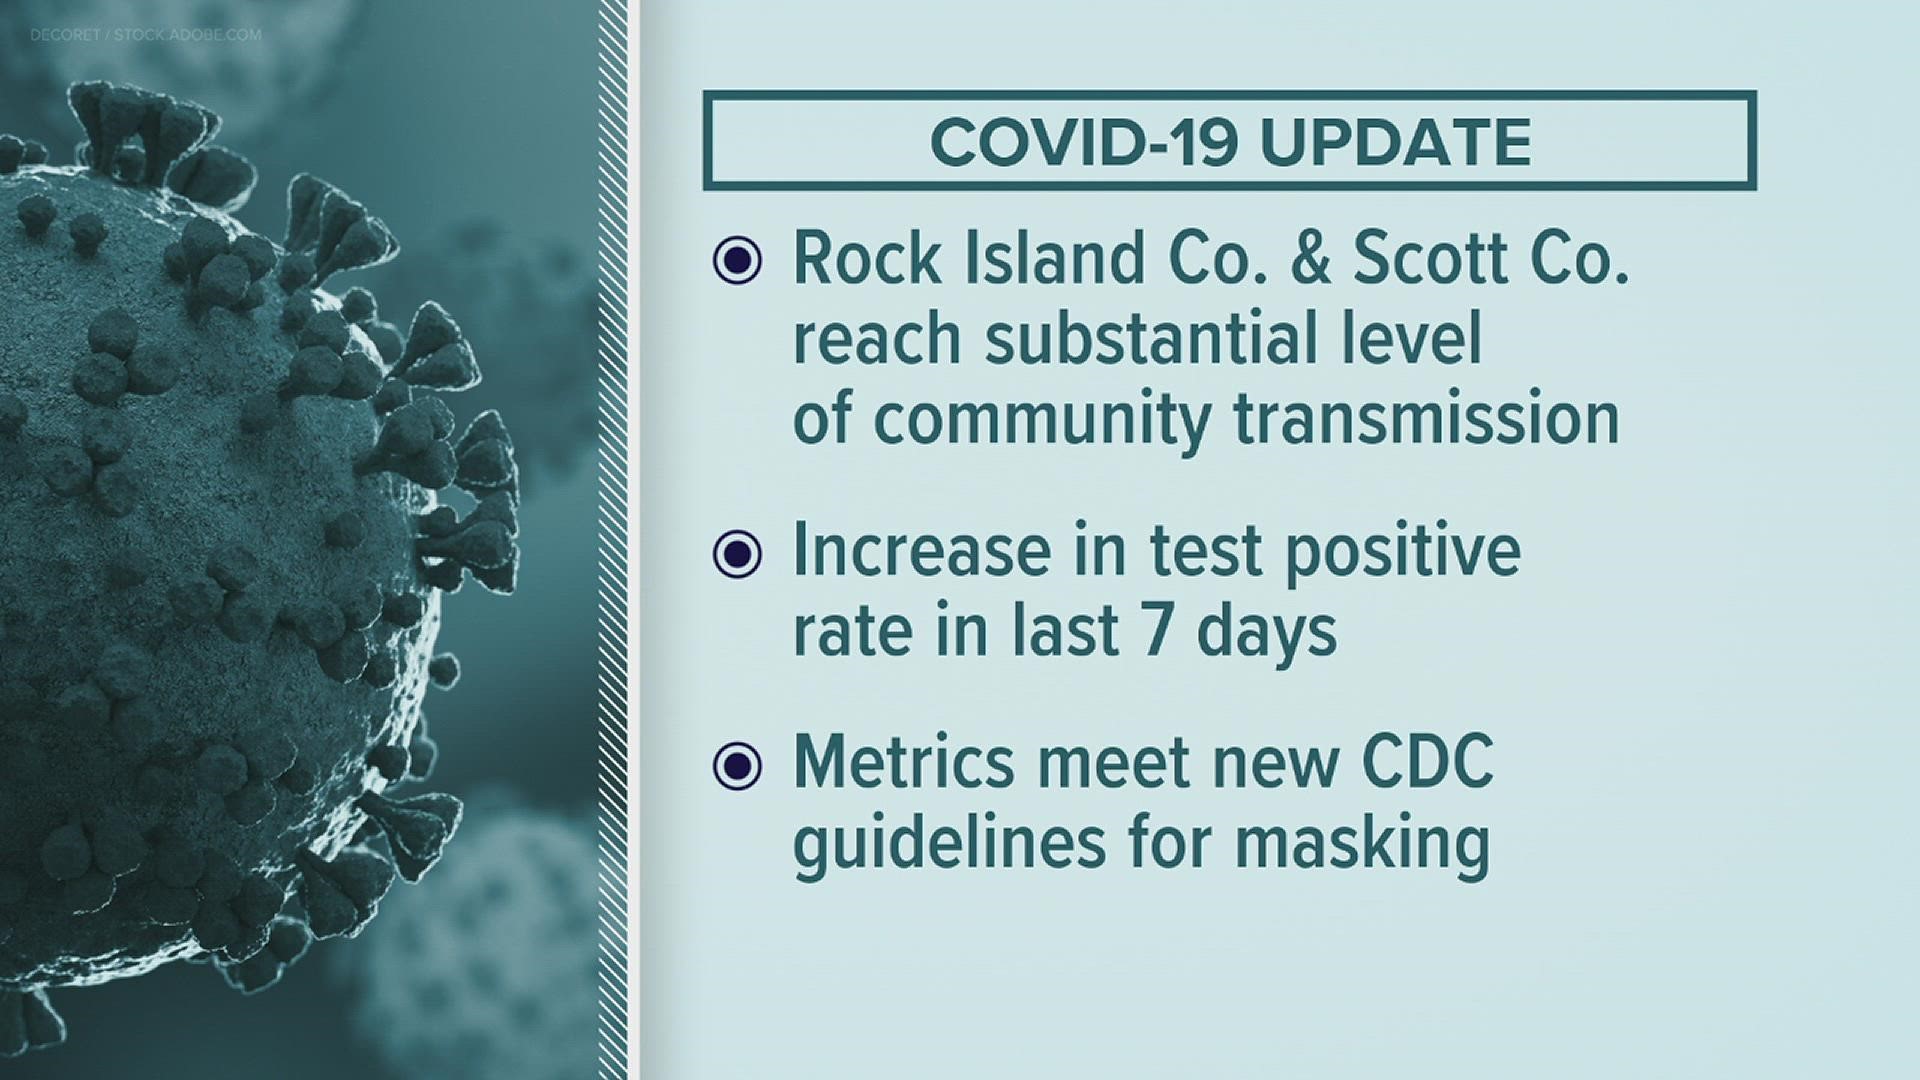 Health officials from both counties confirmed that significant increases in COVID-19 cases over the past week have raised the threat level.